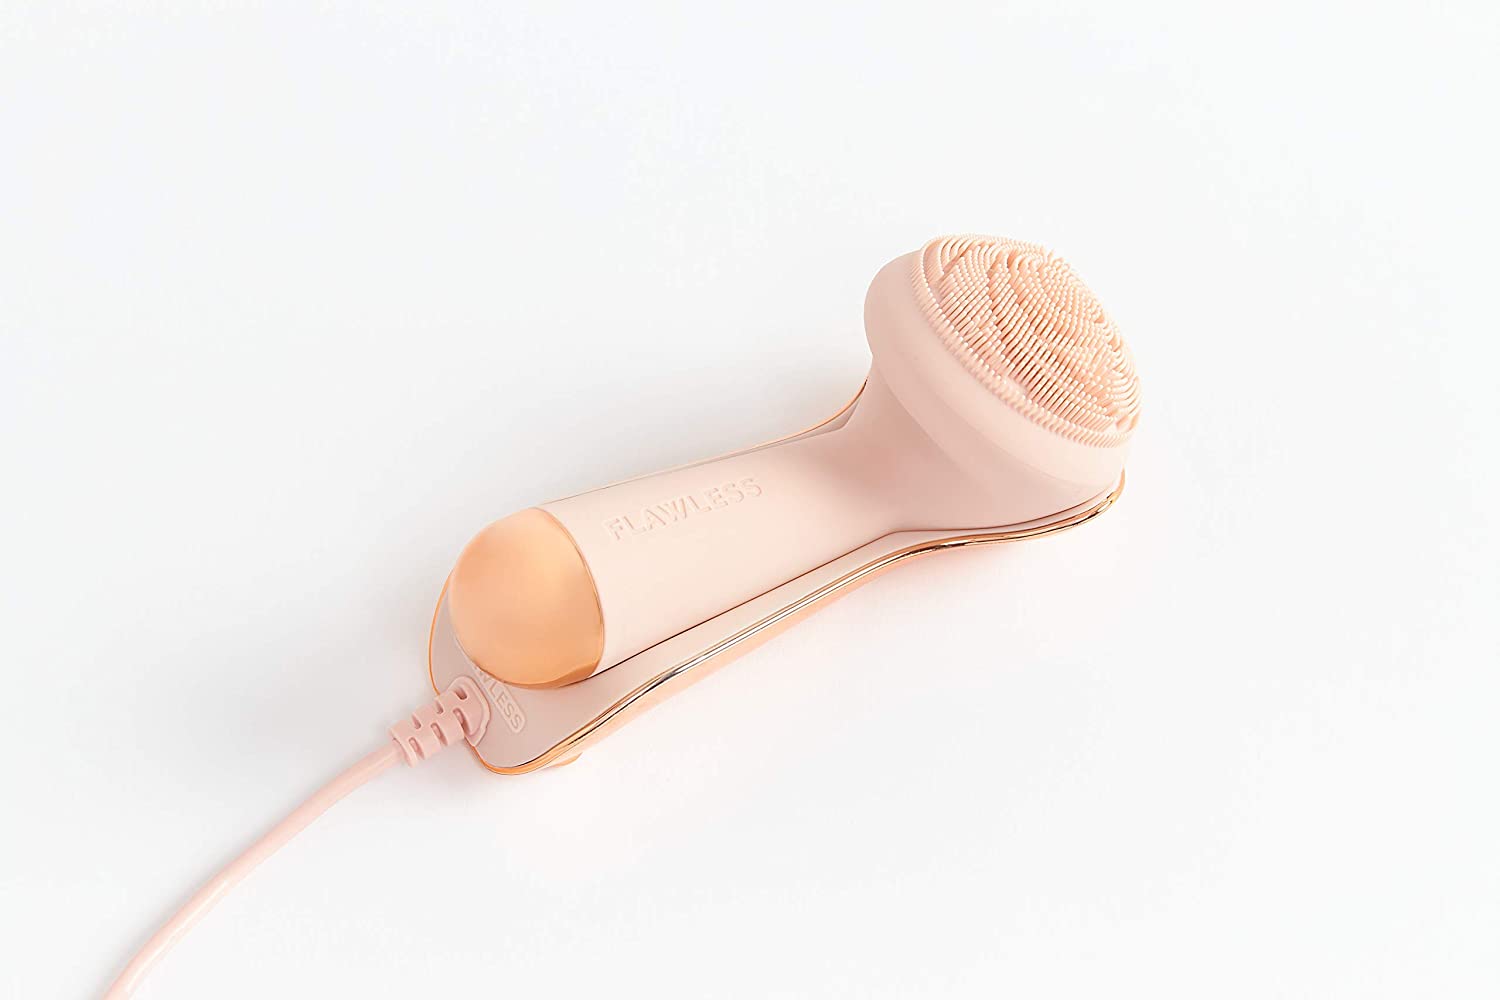 flawless silicone facial brush